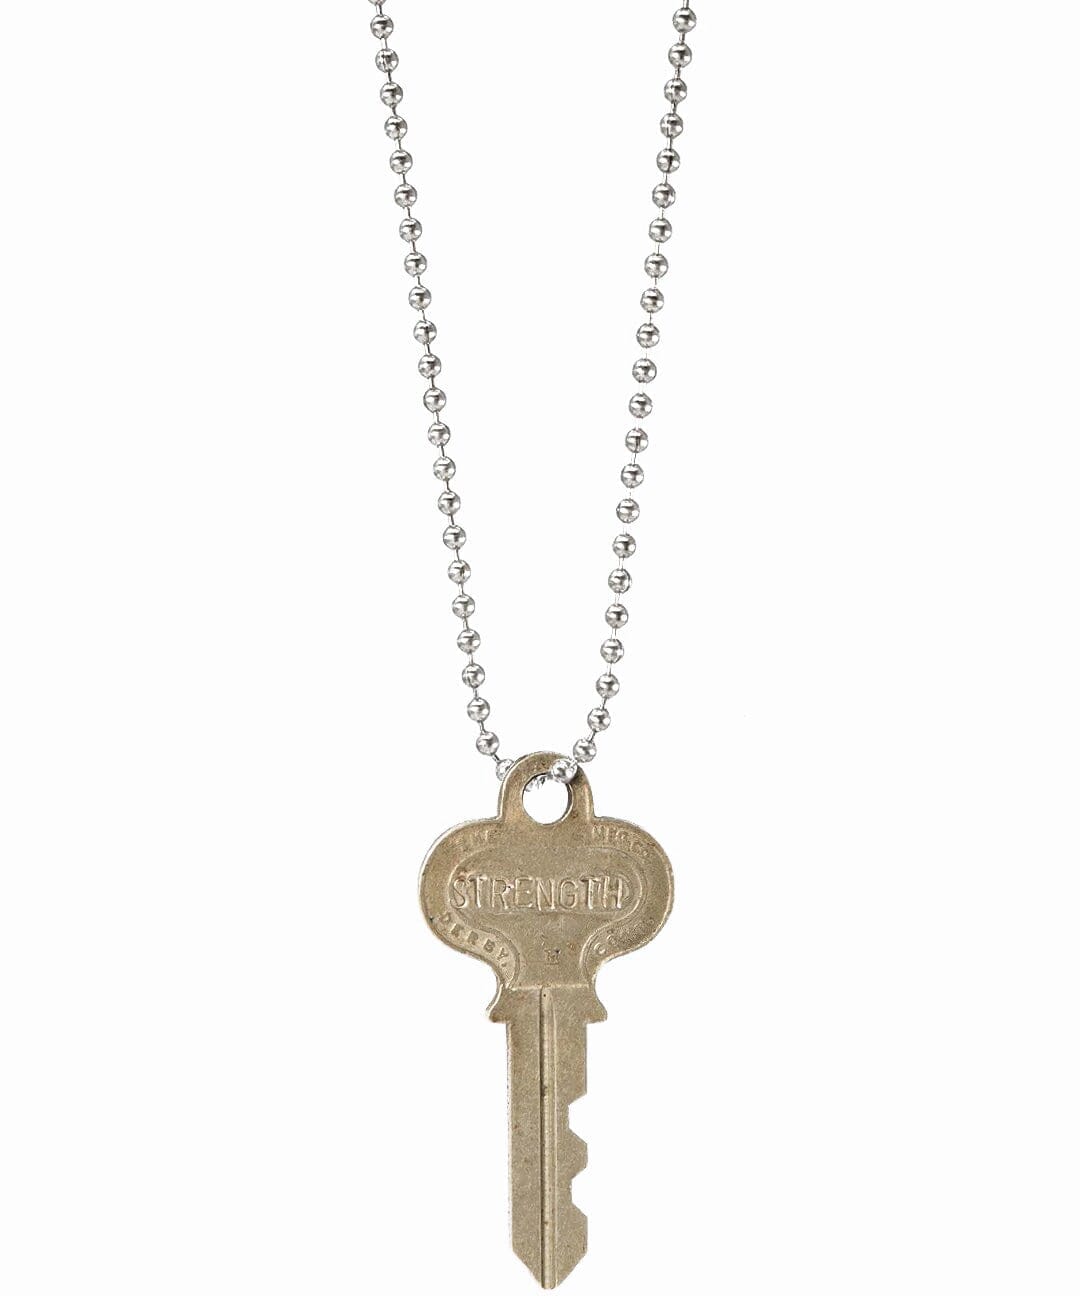 N - Vintage Classic Ball Chain Key Necklace Necklaces The Giving Keys 